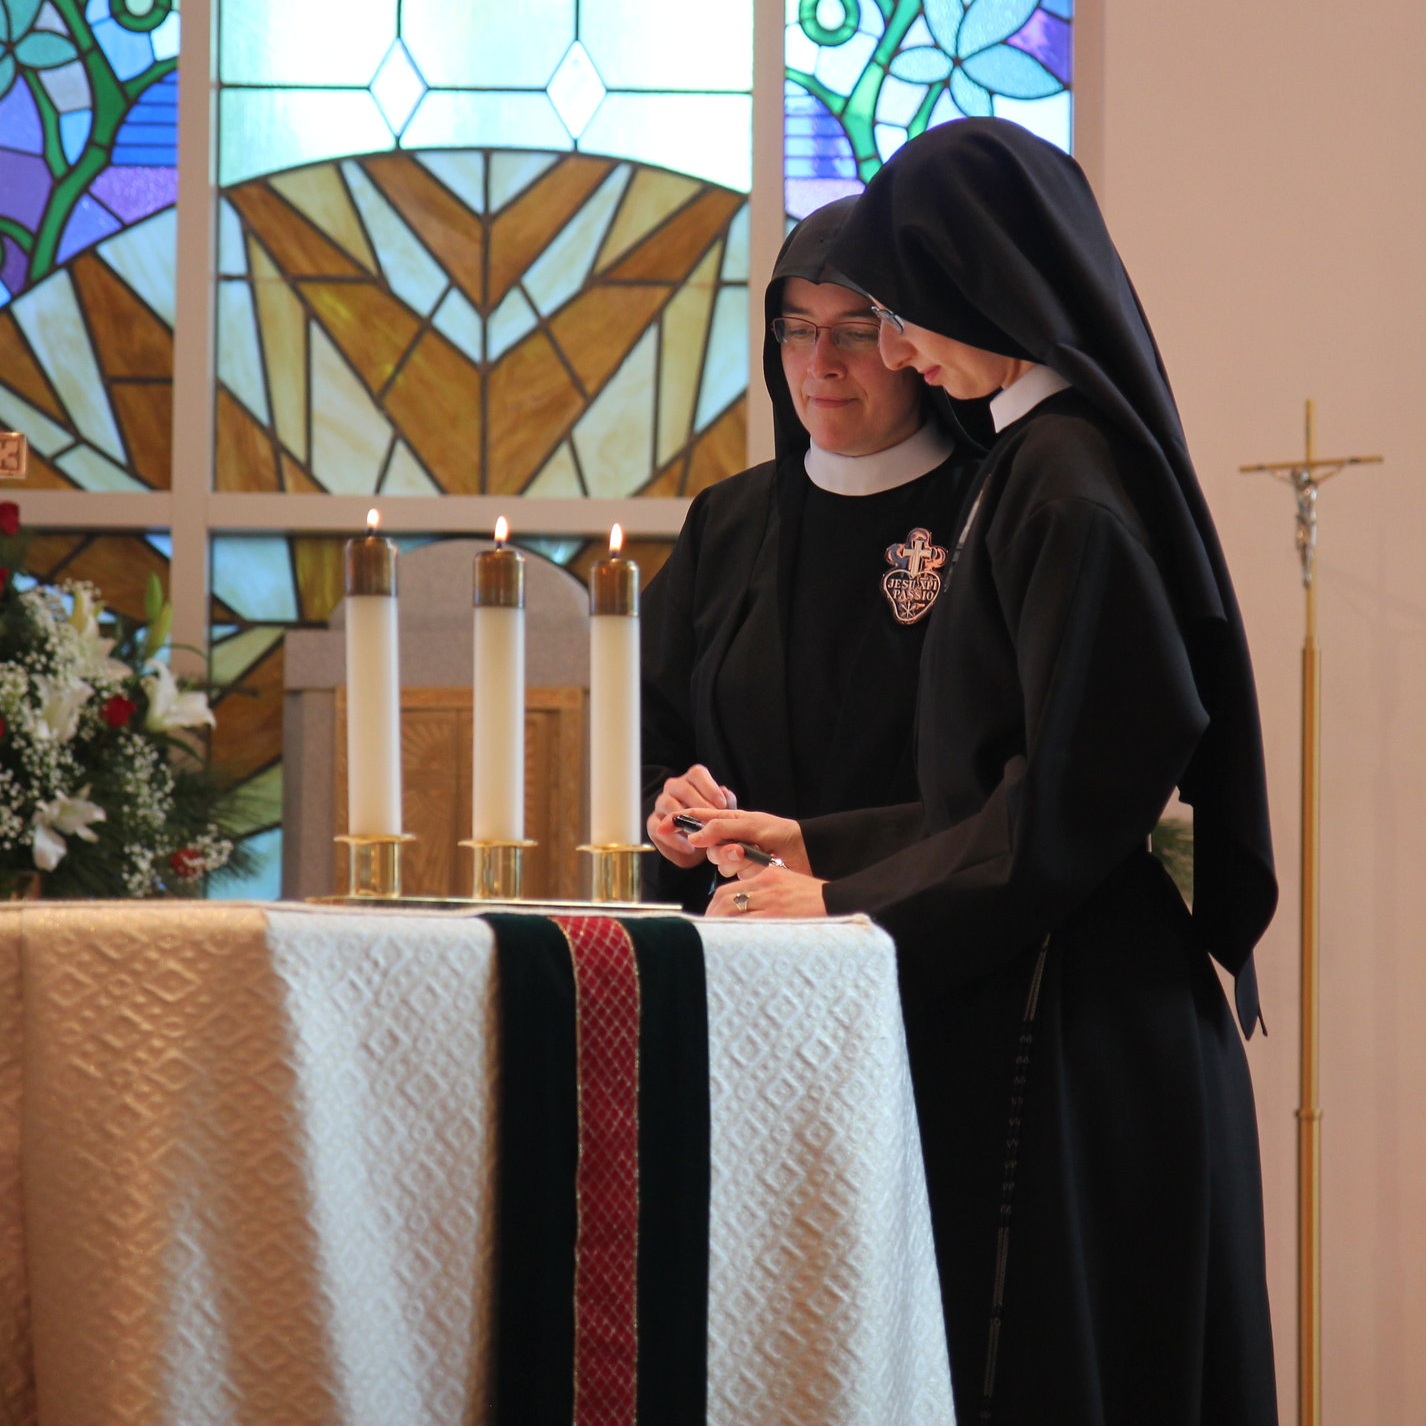  Sr. Cecilia Maria signs the profession formula which remains on the altar for the rest of the Mass, signifying her oblation of self in union with Jesus’ Eucharistic Sacrifice. 